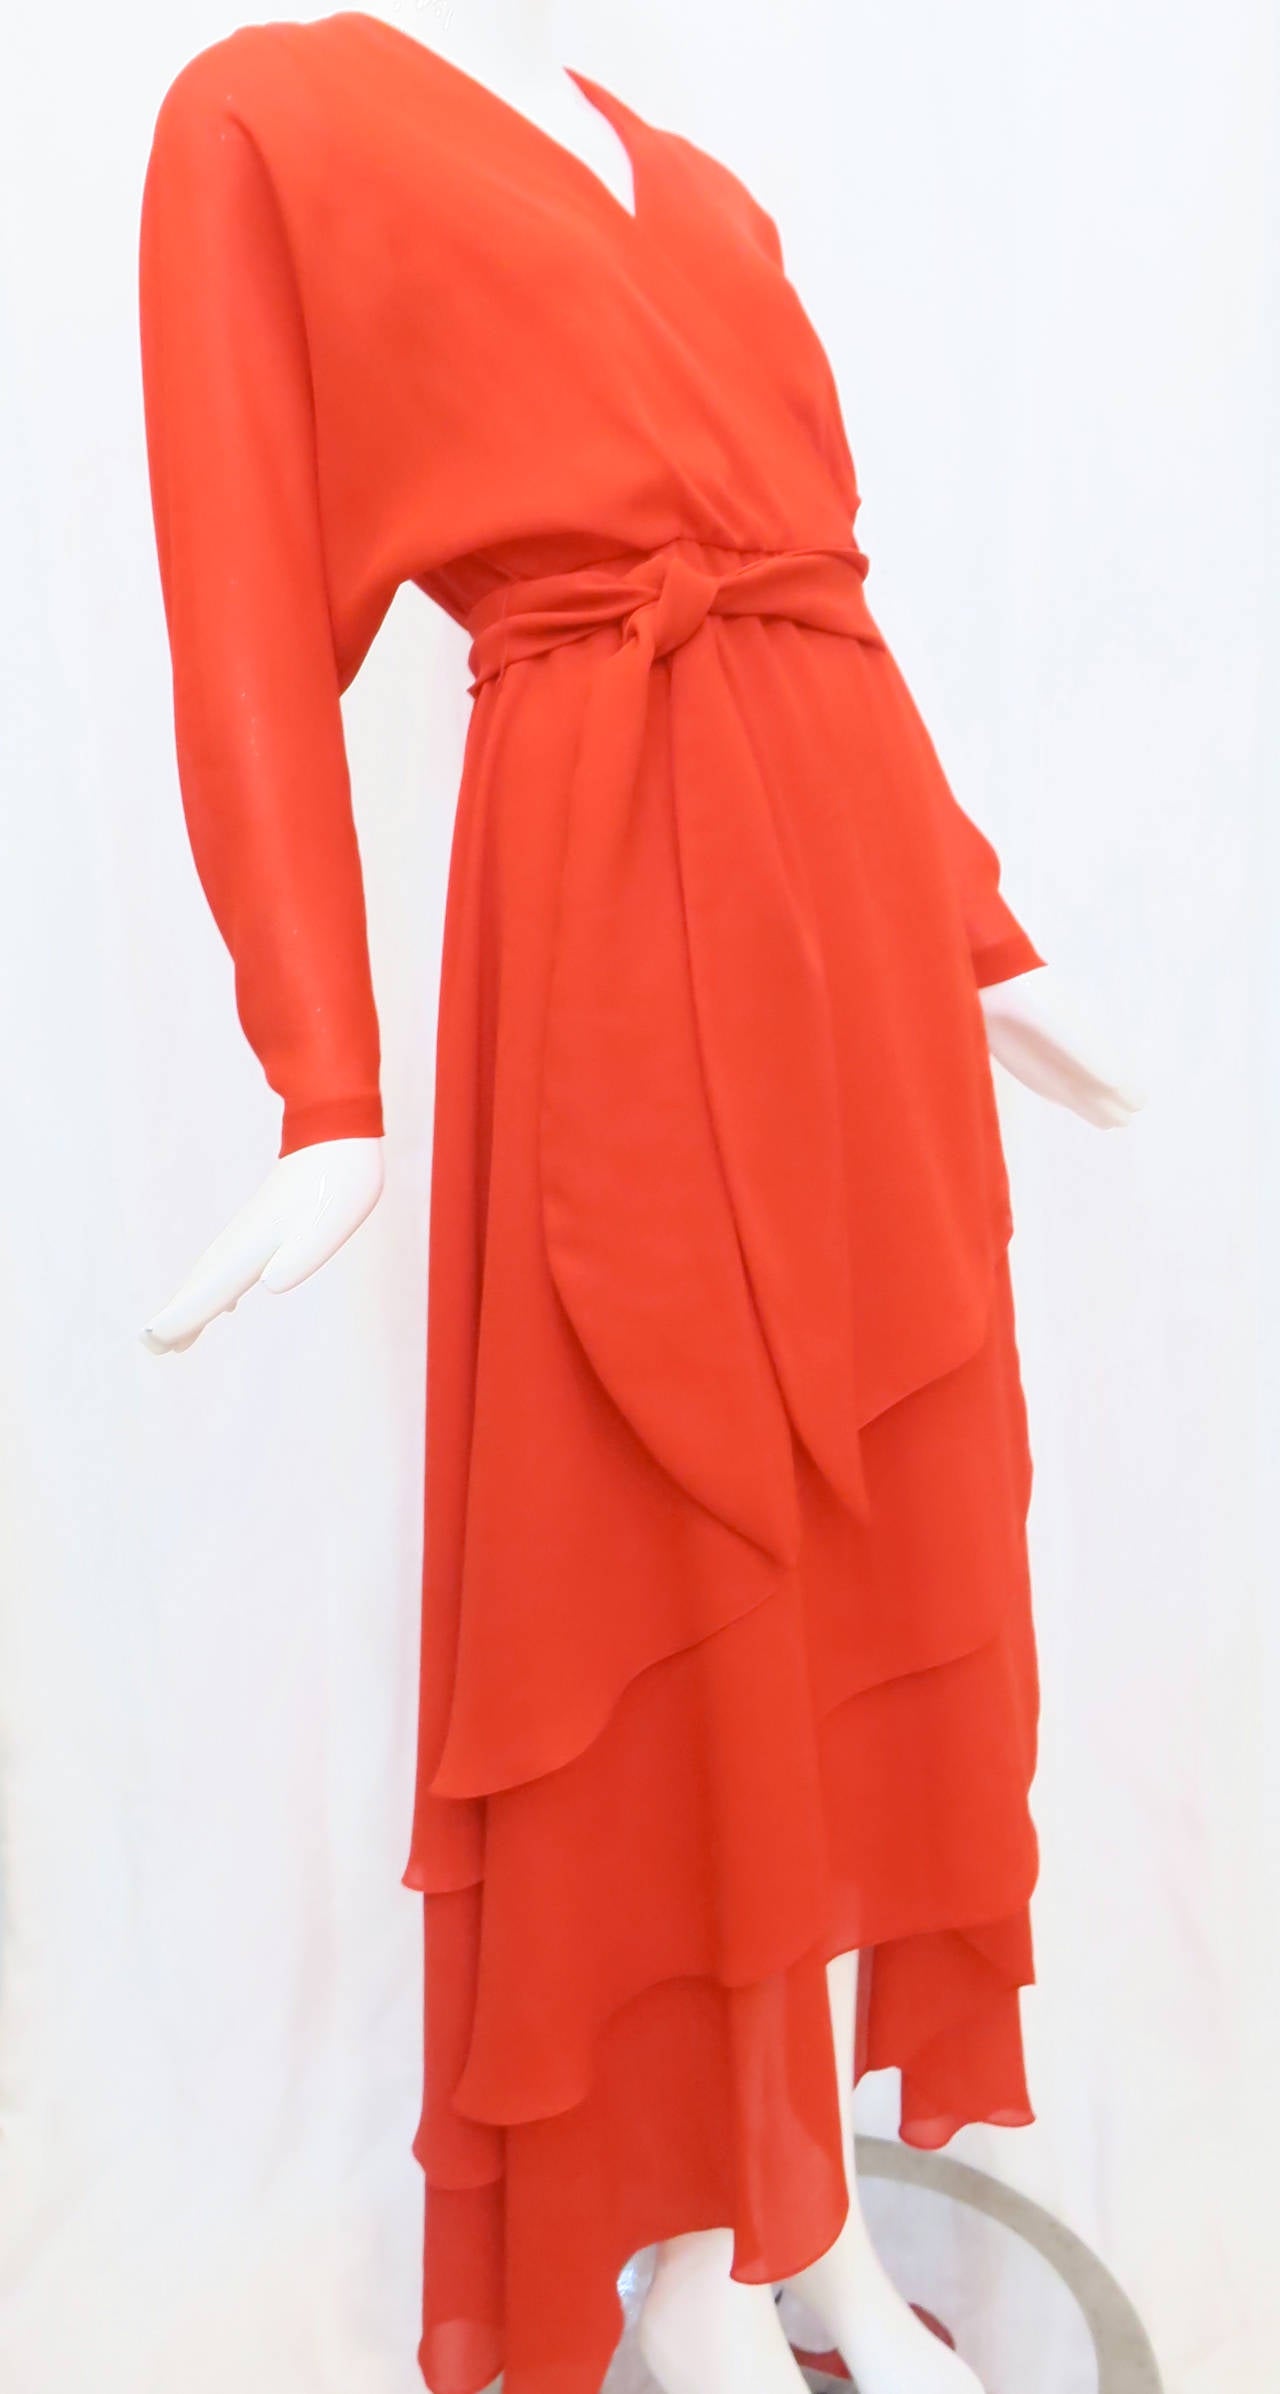 Indicative of the era when fashion reached new levels of expressing and celebrating movement with the body, this 1970s fire red chiffon wrap dress from Robert Courtney fits the bill as a dress that exudes sensuality and elegance. Perhaps what makes